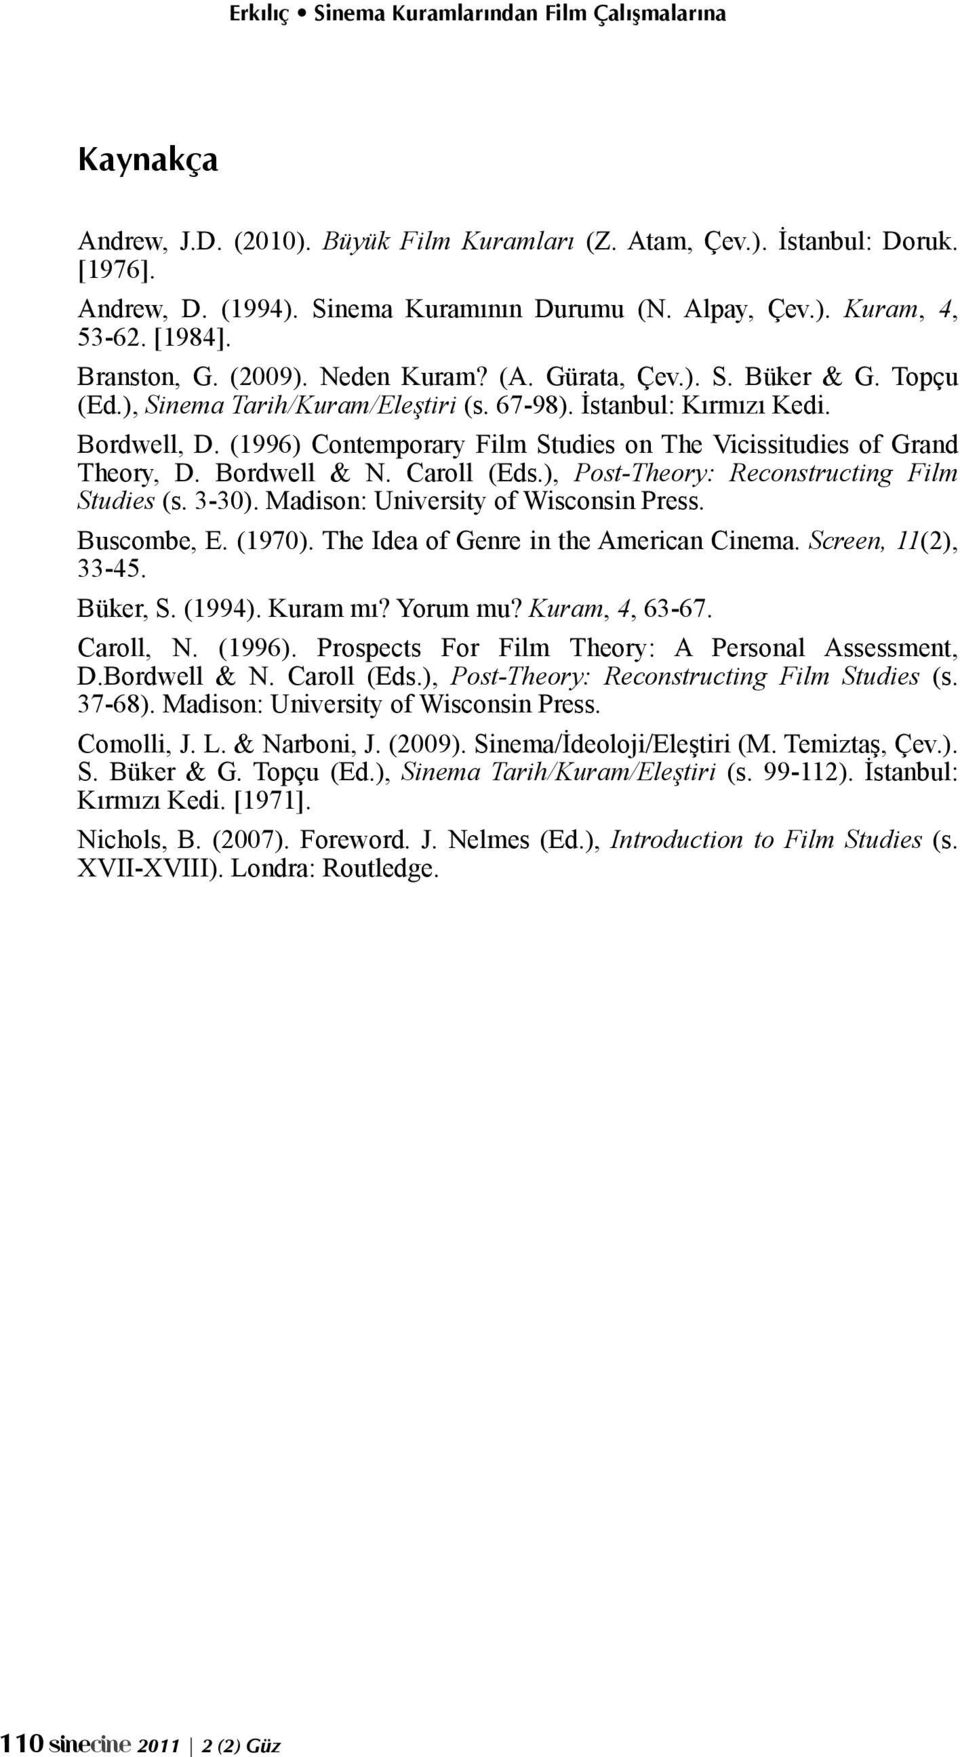 (1996) Contemporary Film Studies on The Vicissitudies of Grand Theory, D. Bordwell & N. Caroll (Eds.), Post-Theory: Reconstructing Film Studies (s. 3-30). Madison: University of Wisconsin Press.